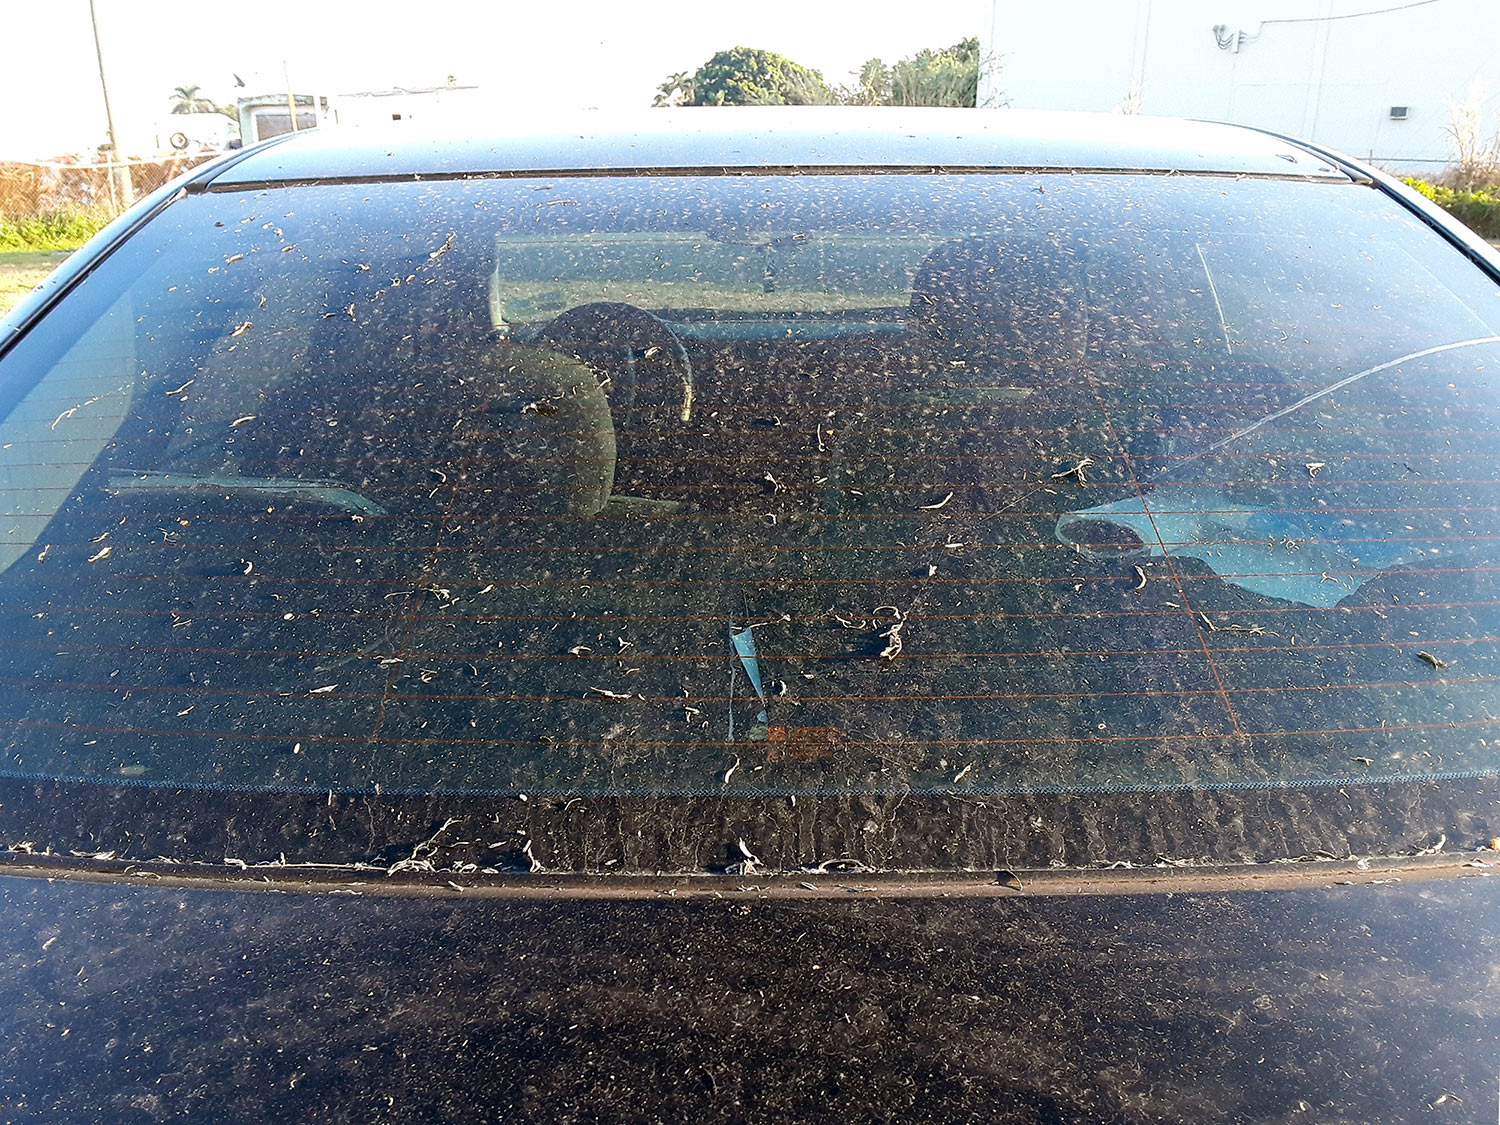 “Black snow,” as sugarcane ash is called in the Glades, covers the hood and windshield of a car.